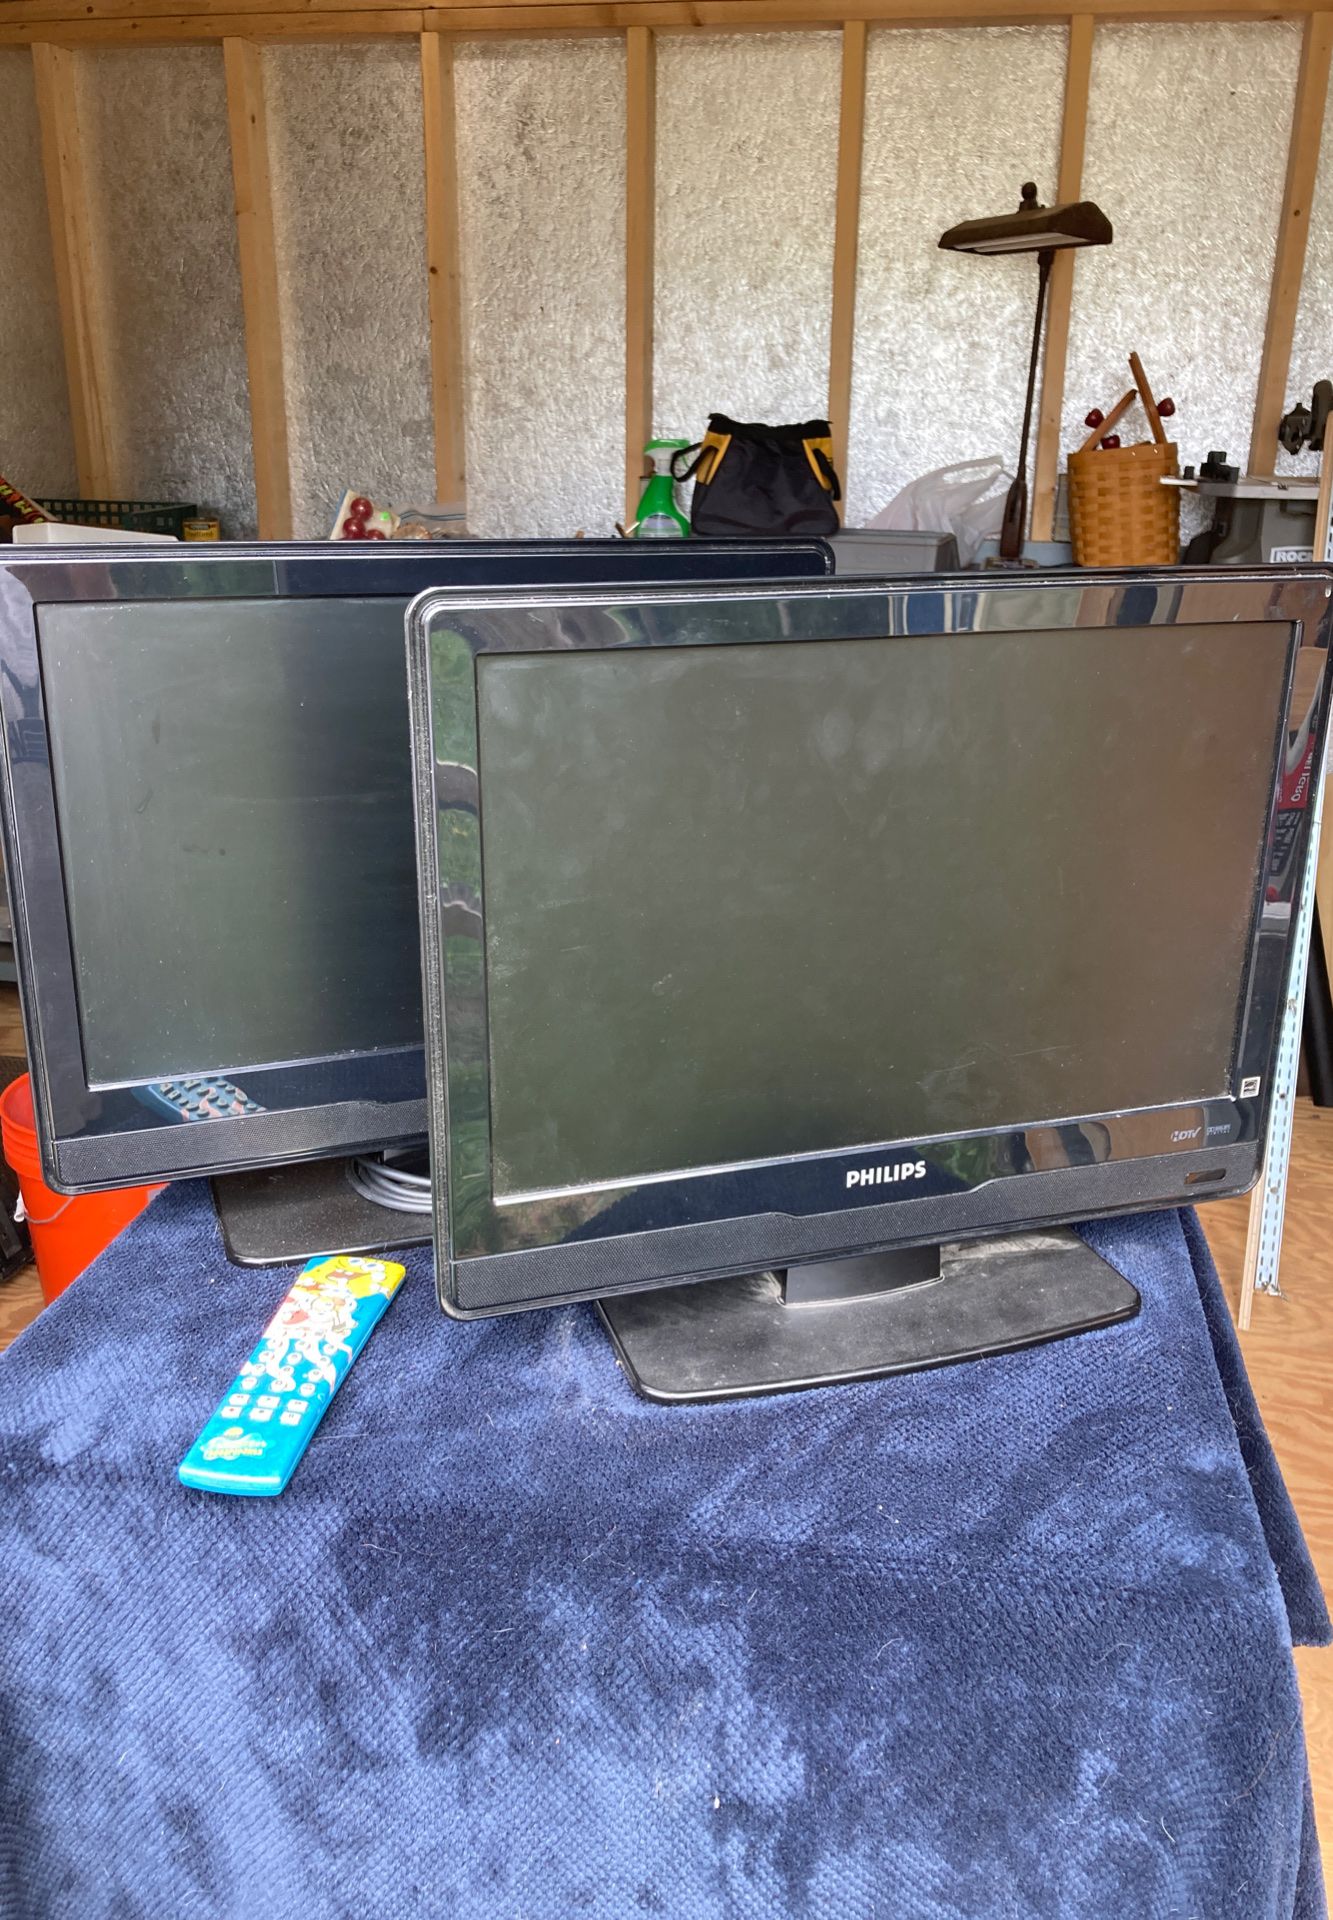 Phillips 19” monitors one aftermarket remote